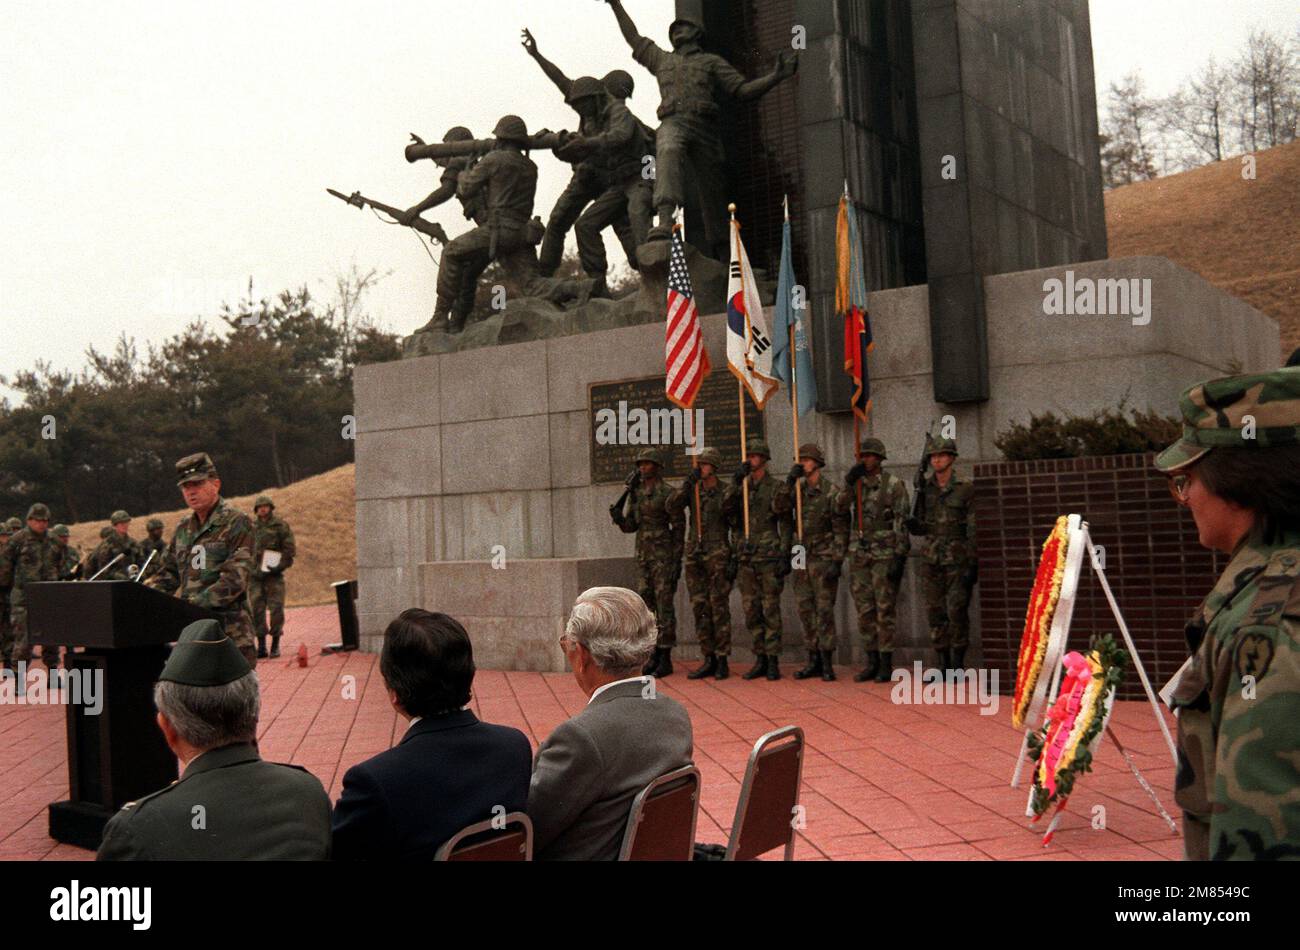 MAJ. GEN. Claude M. Kicklighter, commander, 25th Inf. Div., speaks during a wreath laying ceremony at the Task Force Smith Memorial which commemorates the first major battle of the Korean War. Attending the ceremony were former members of the 24th and 25th Infantry Division and in the background stands a color guard composed of members of the 1ST Bn., 21st Inf., 25th Inf. Div., deployed from Hawaii to participate in the joint U.S./Korean Exercise Team Spirit '86. Subject Operation/Series: TEAM SPIRIT '86 Base: Osan City Country: Korea Stock Photo